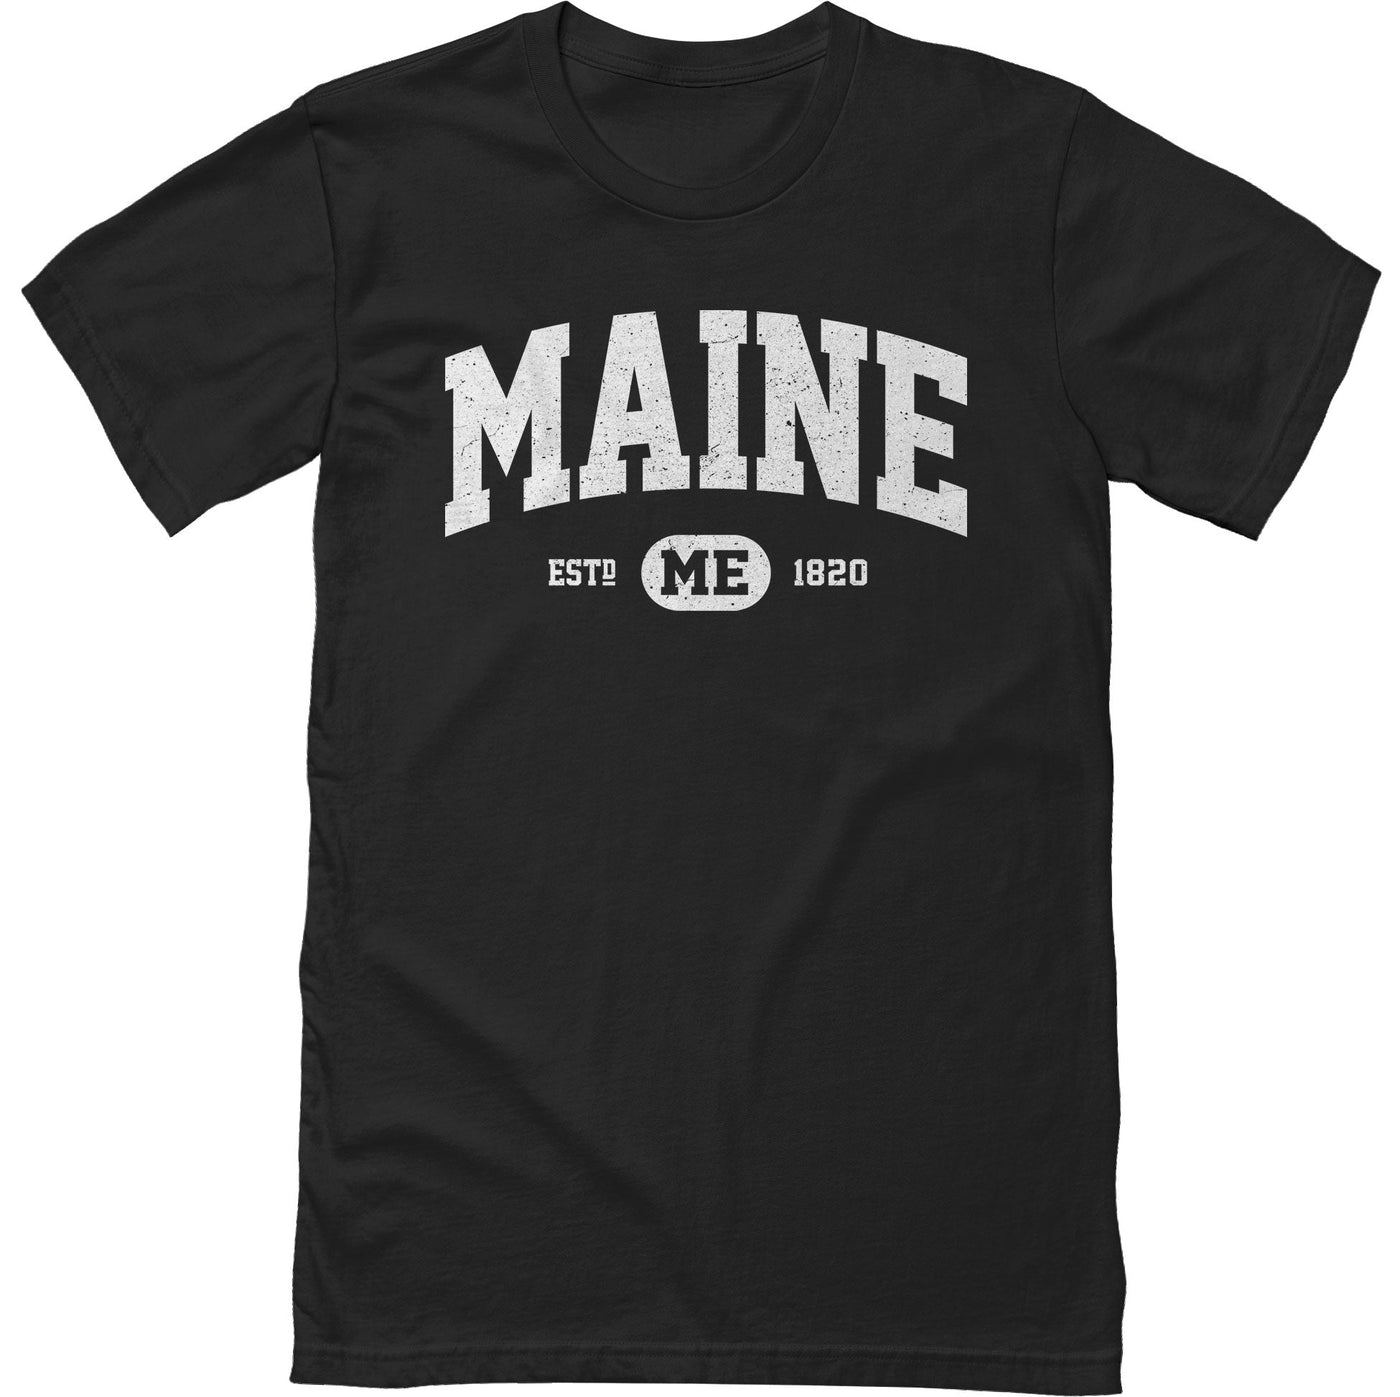 Vintage Maine T-Shirt - University of Maine College Style Tee